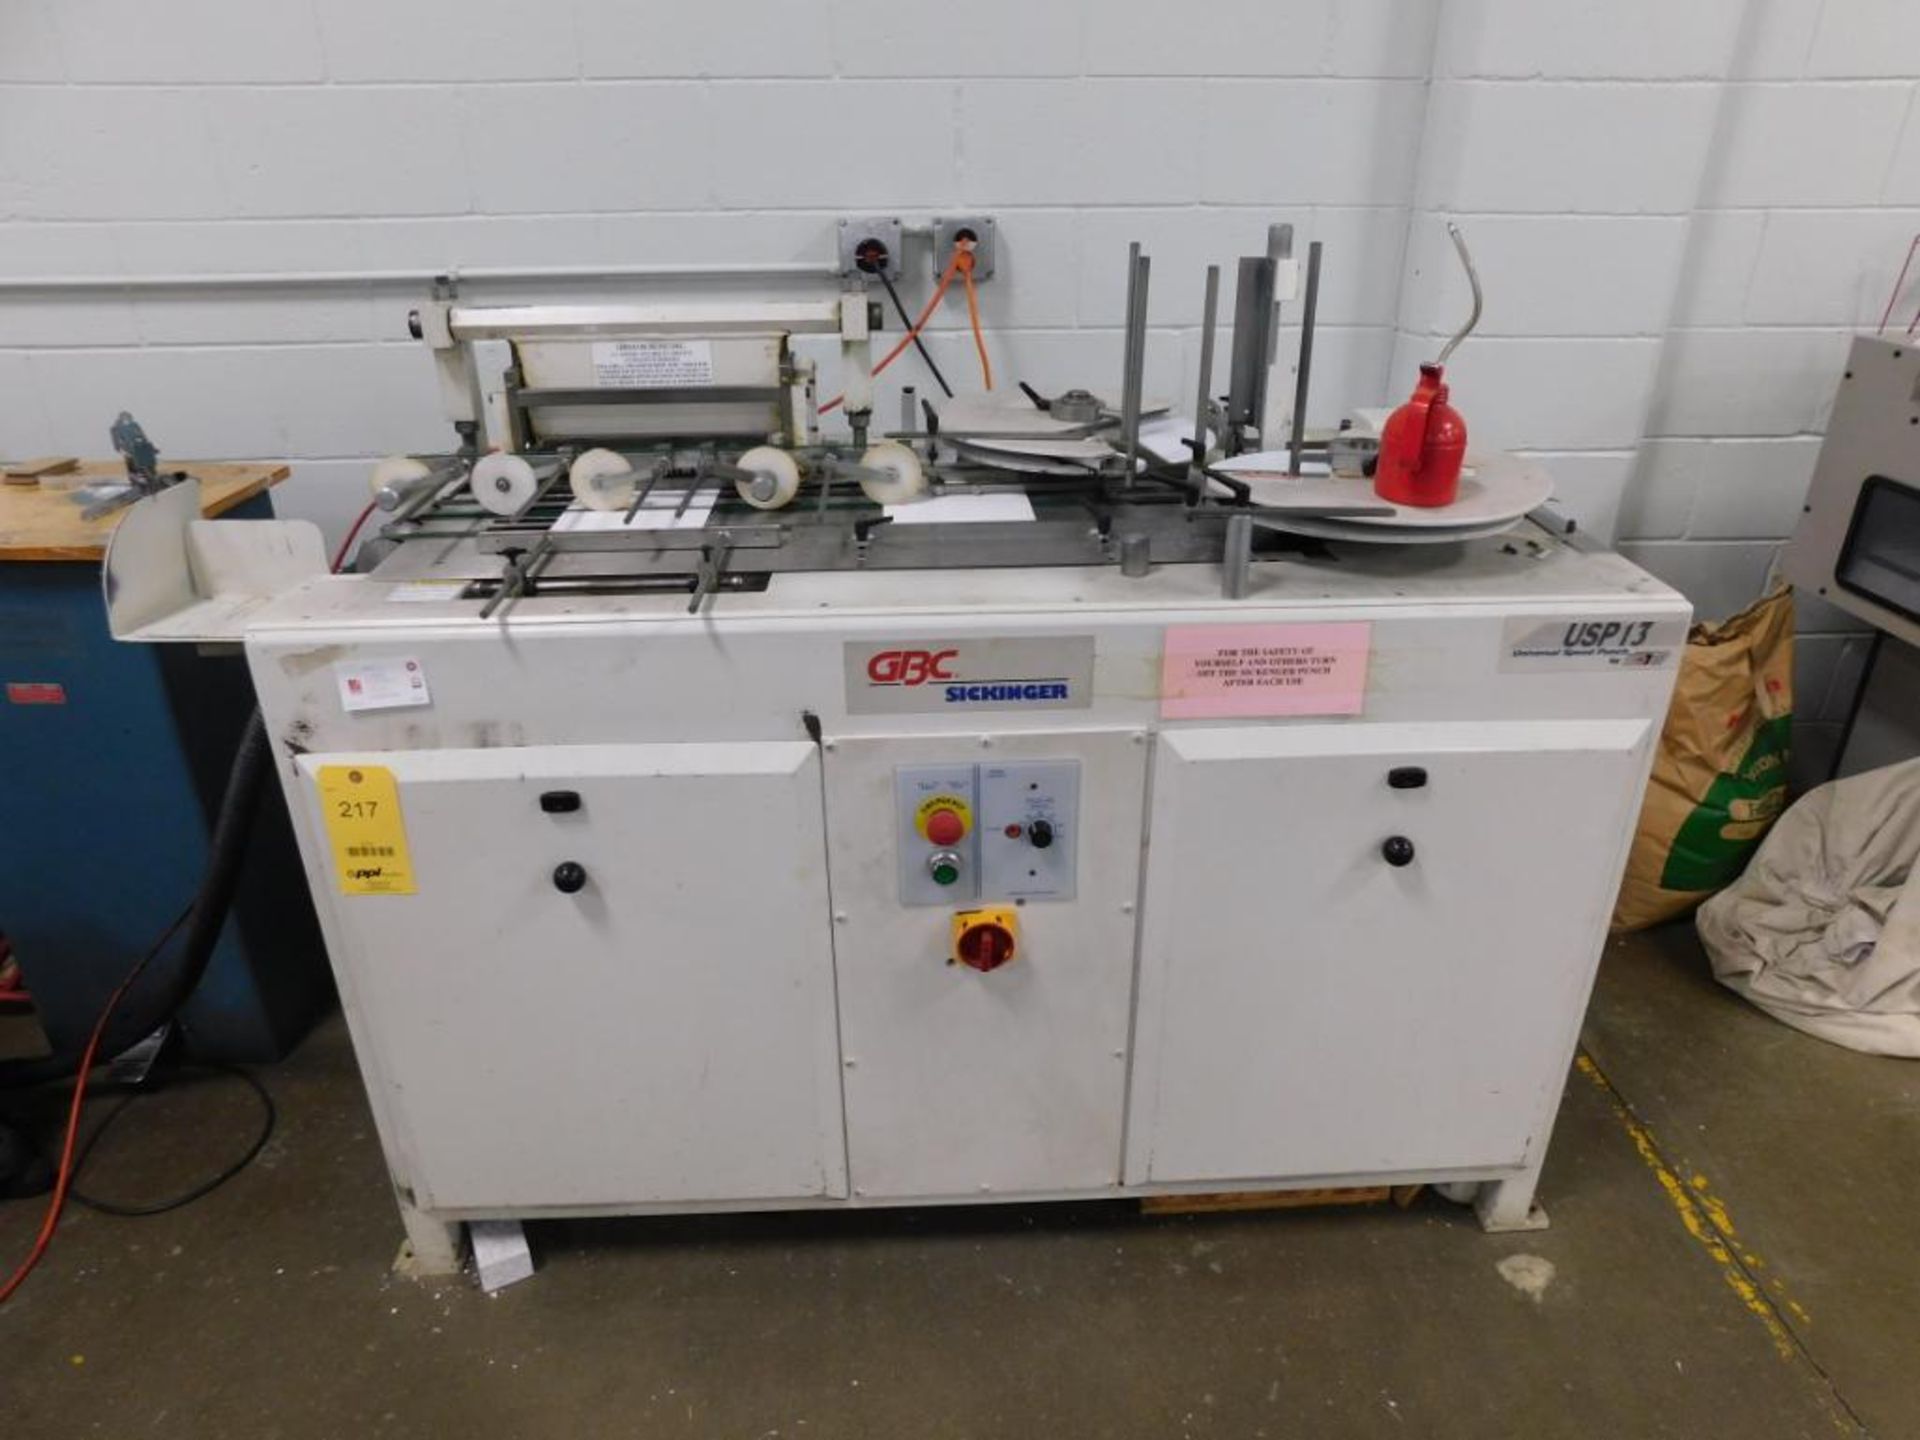 GBC Sickinger Universal Speed Punch Model USP13, S/N 1898-S-0797 (LOCATED IN BLOOMINGTON, MN.)